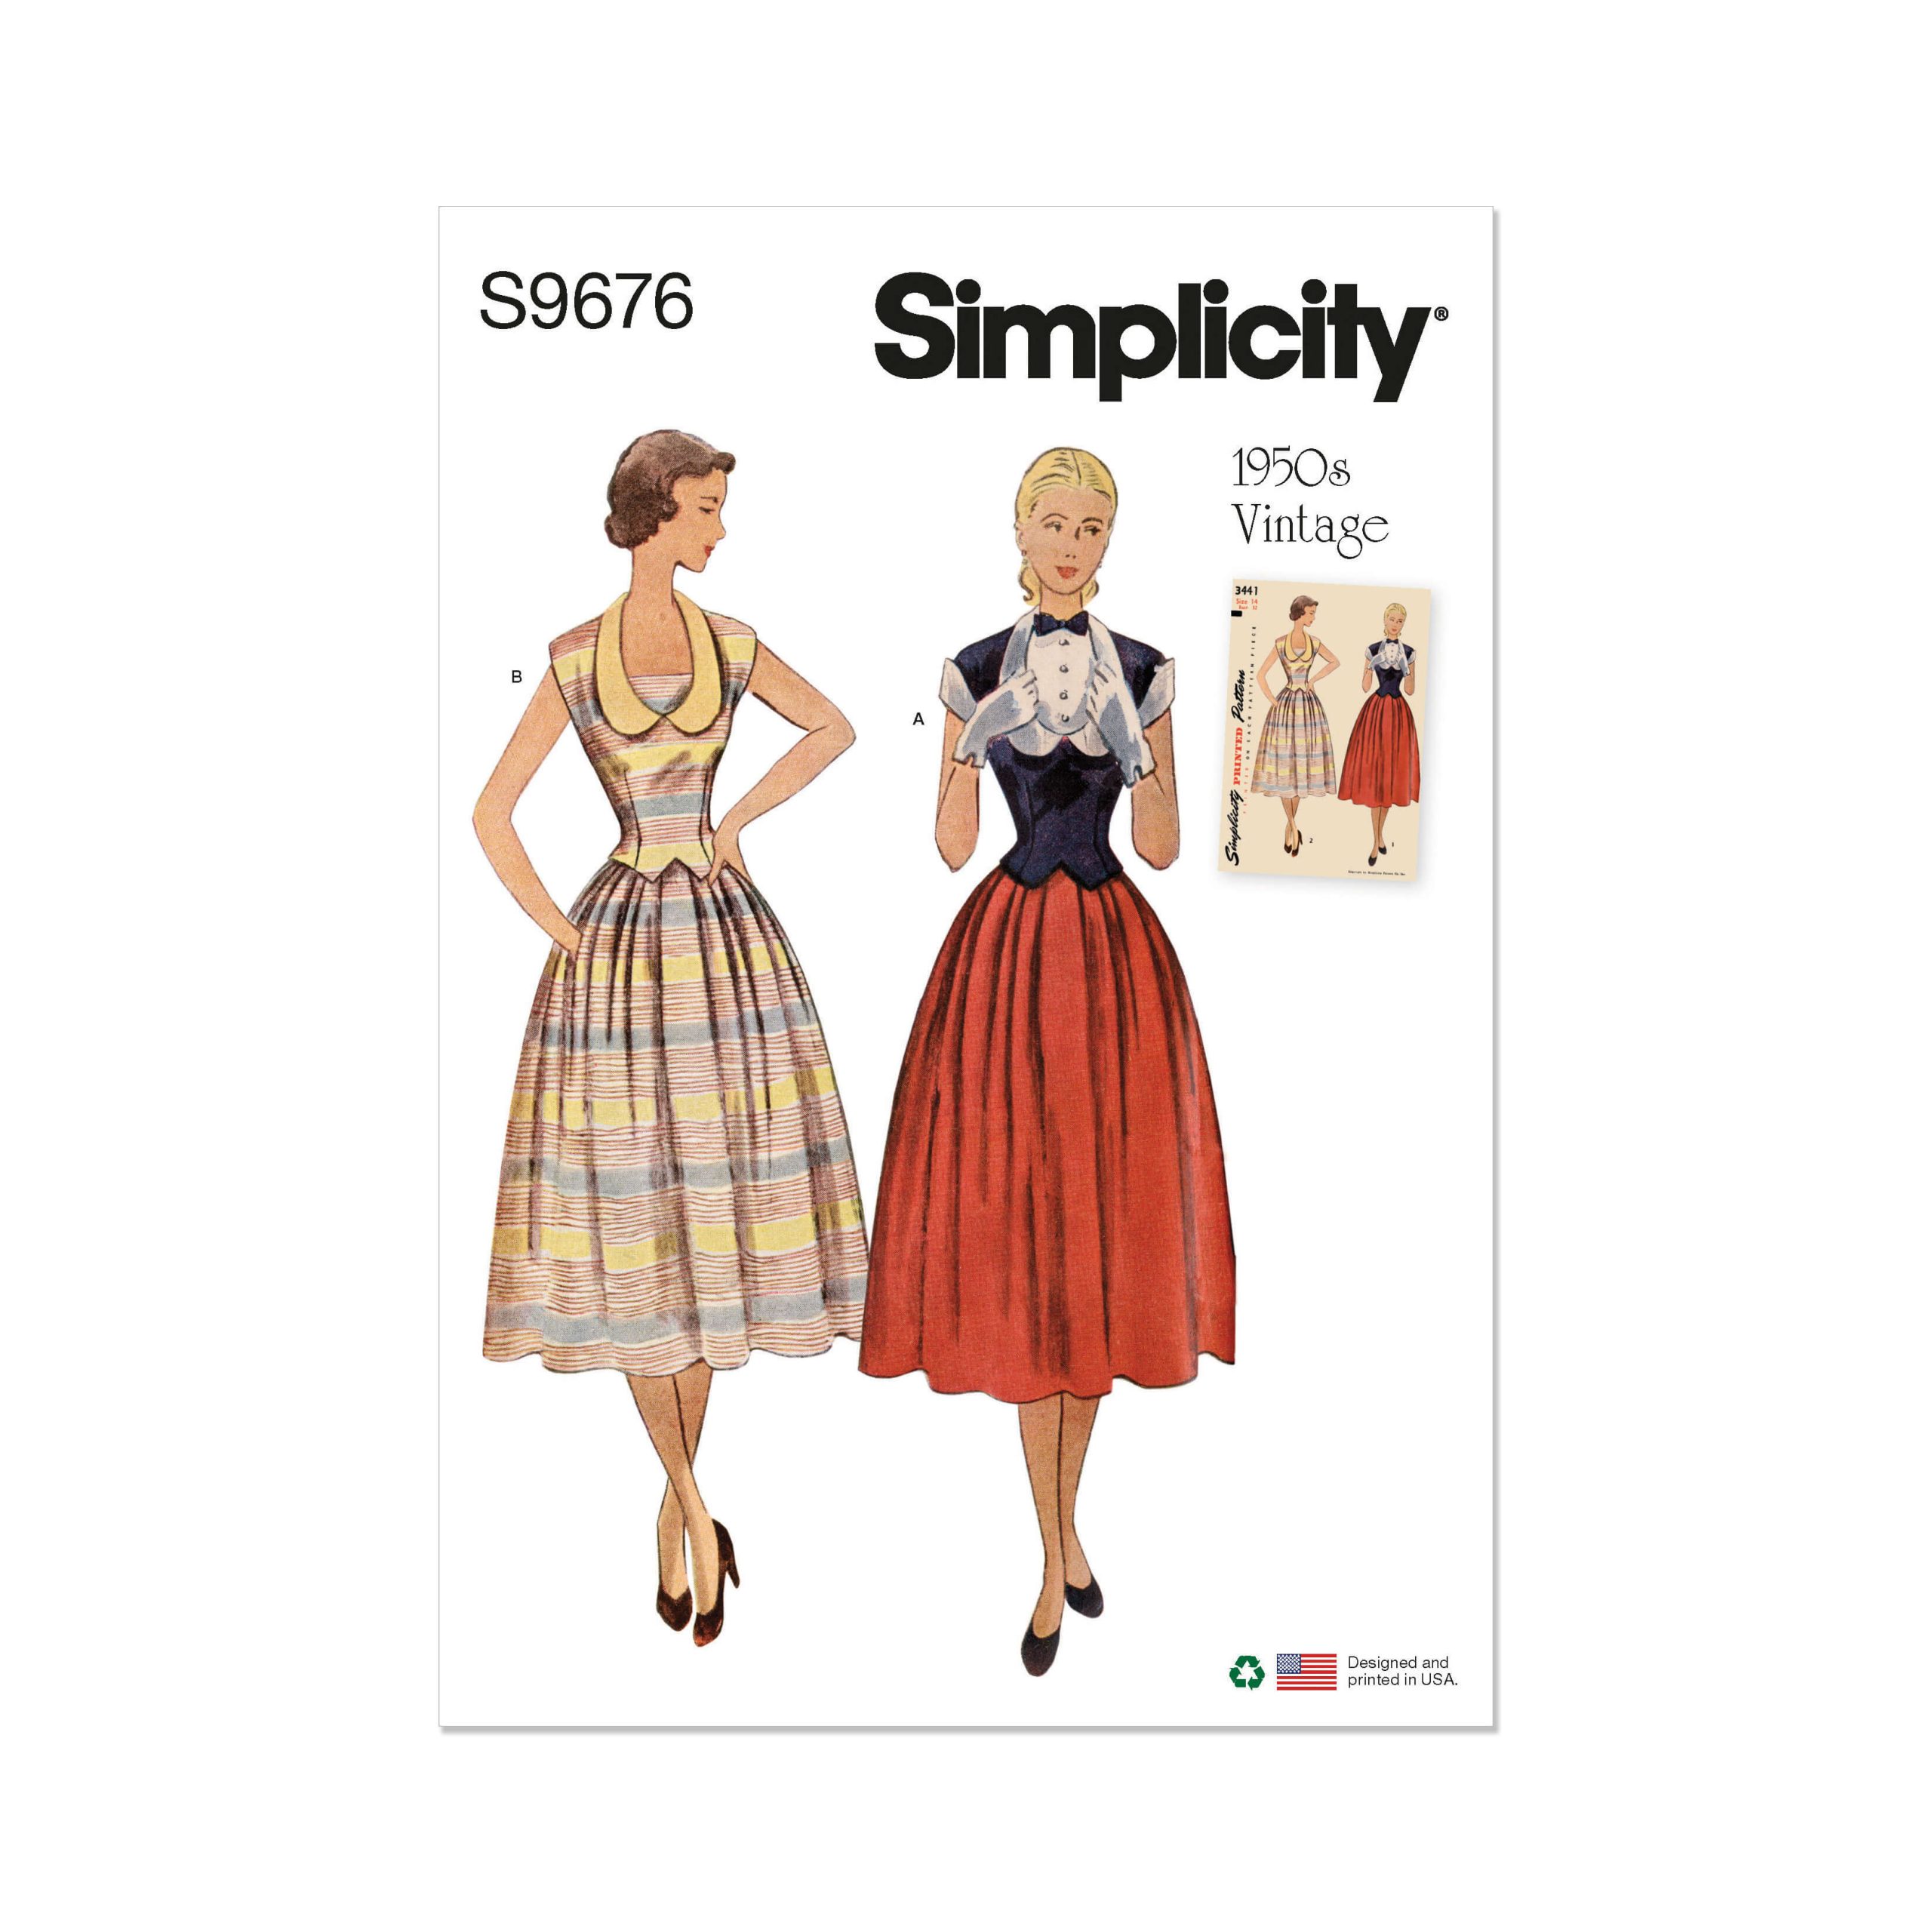 Simplicity Sewing Pattern S9676 Misses' Vintage Two-Piece Dresses